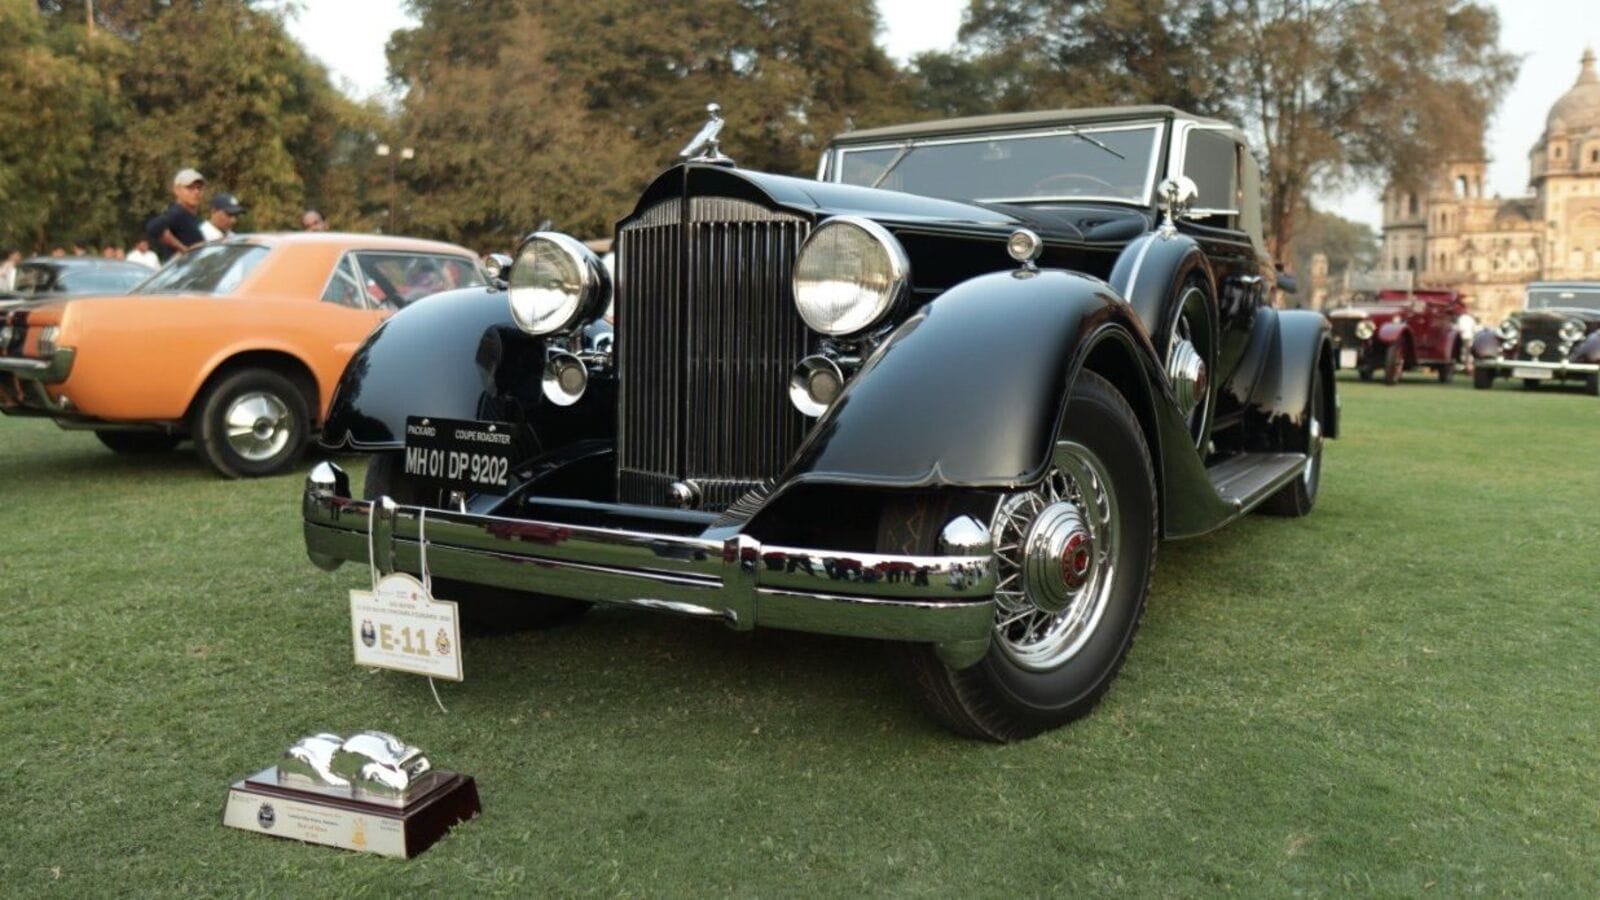 1934 Packard Coupe Roadster wins at vintage car show in Vadodara